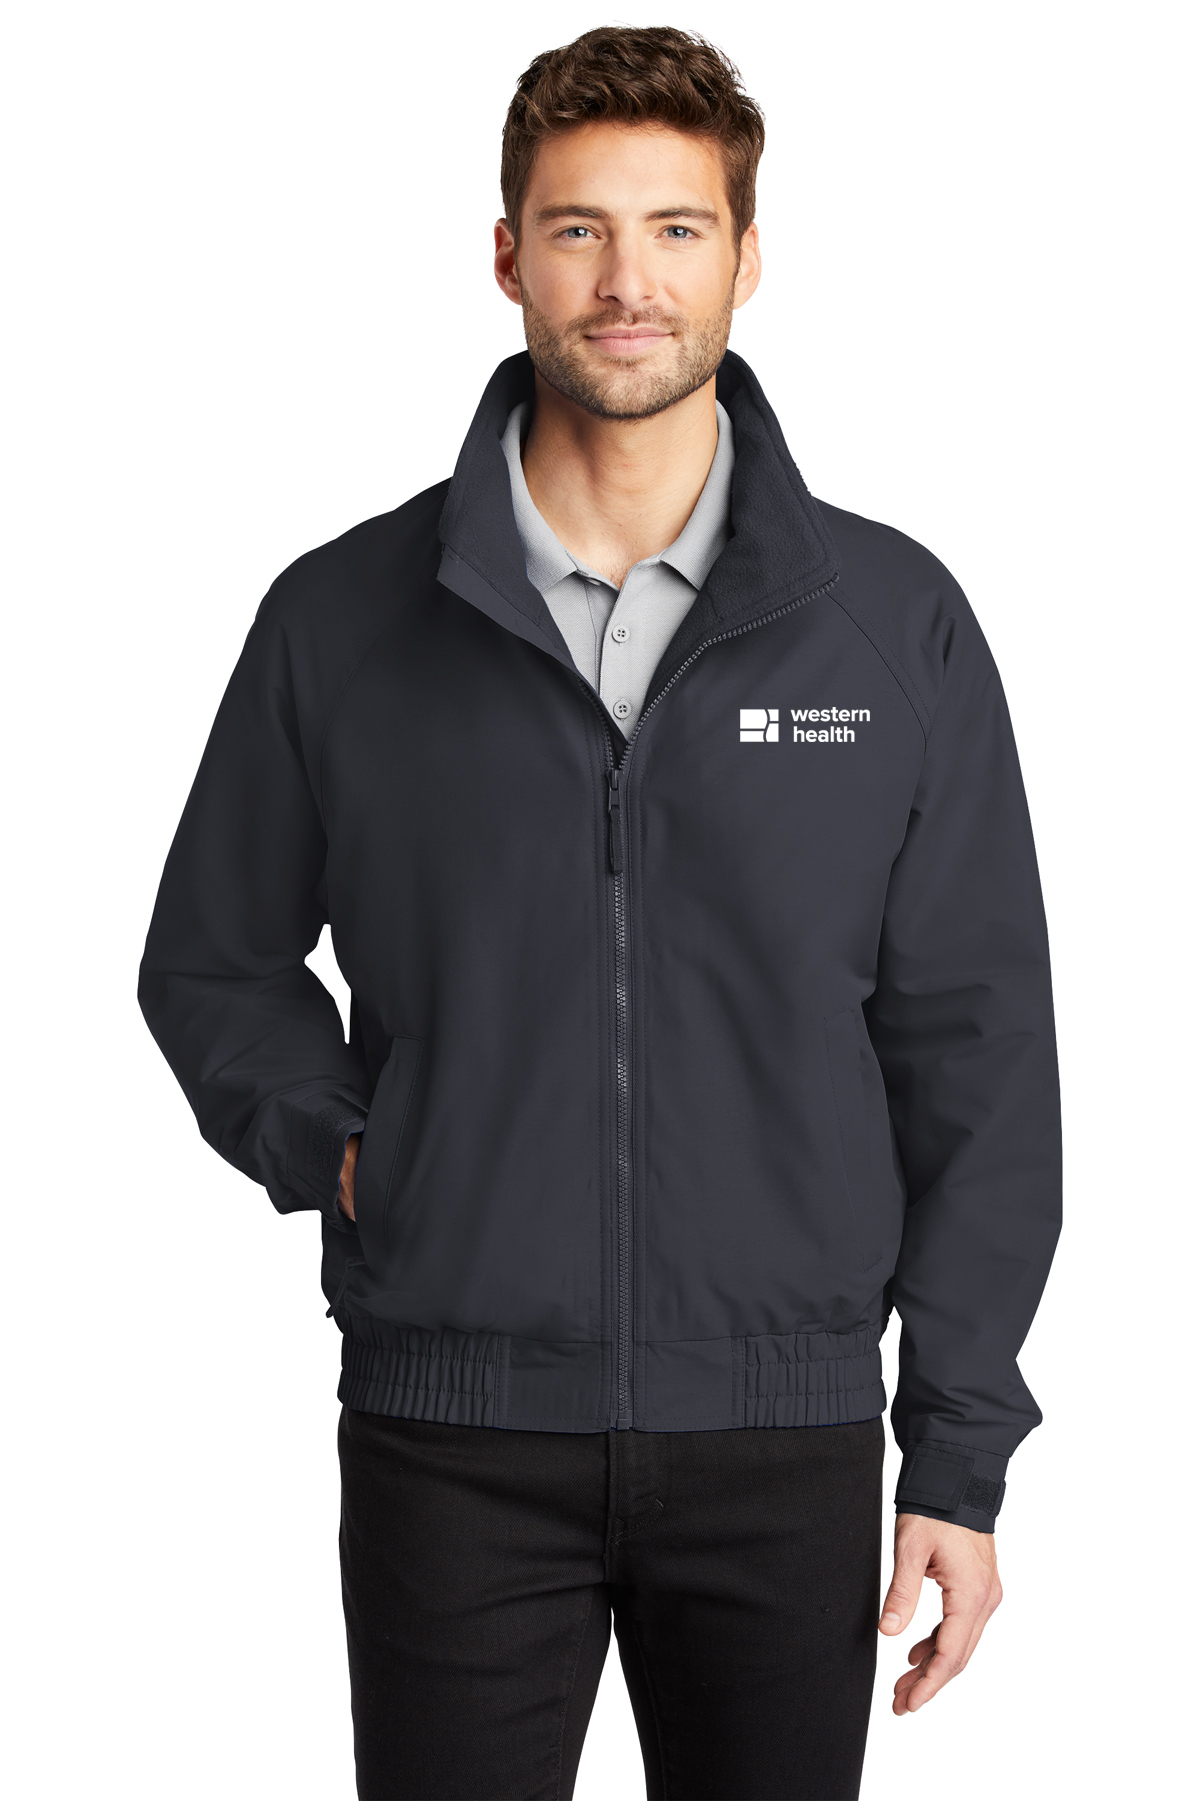 NEW Port Authority® Lightweight Charger Jacket - Western Health